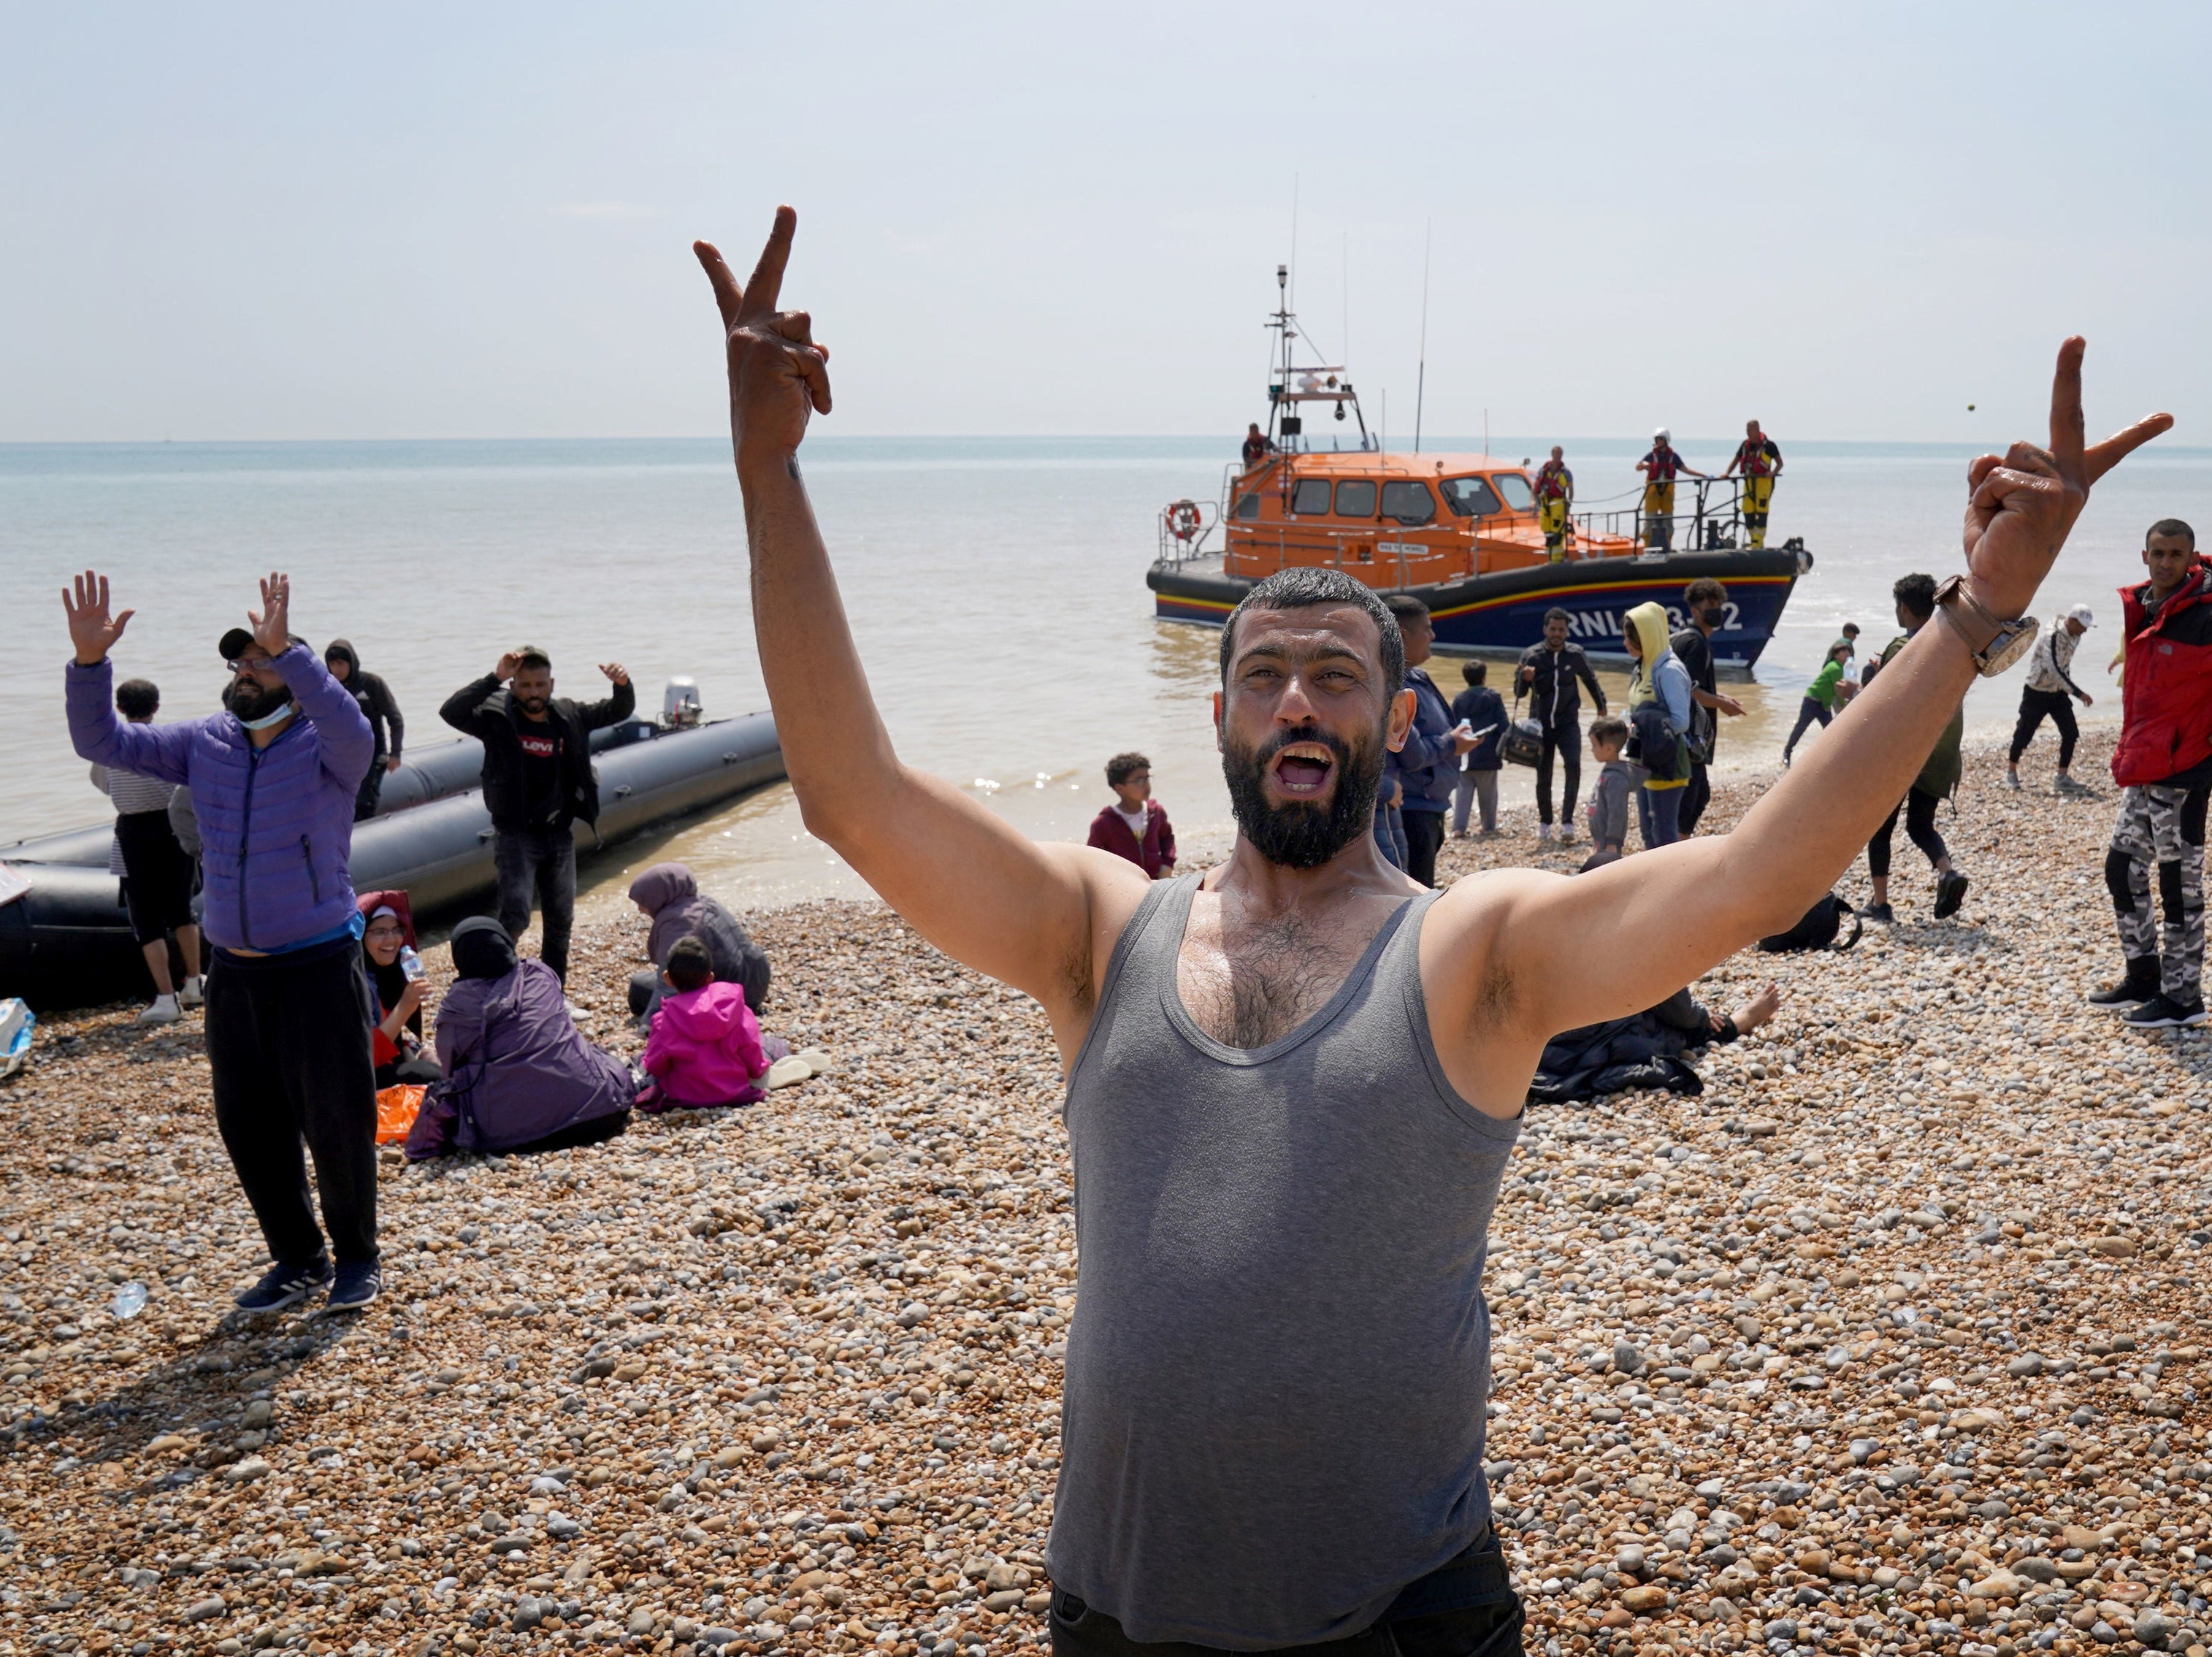 Migrants make their way up the beach after arriving on a small boat at Dungeness in Kent